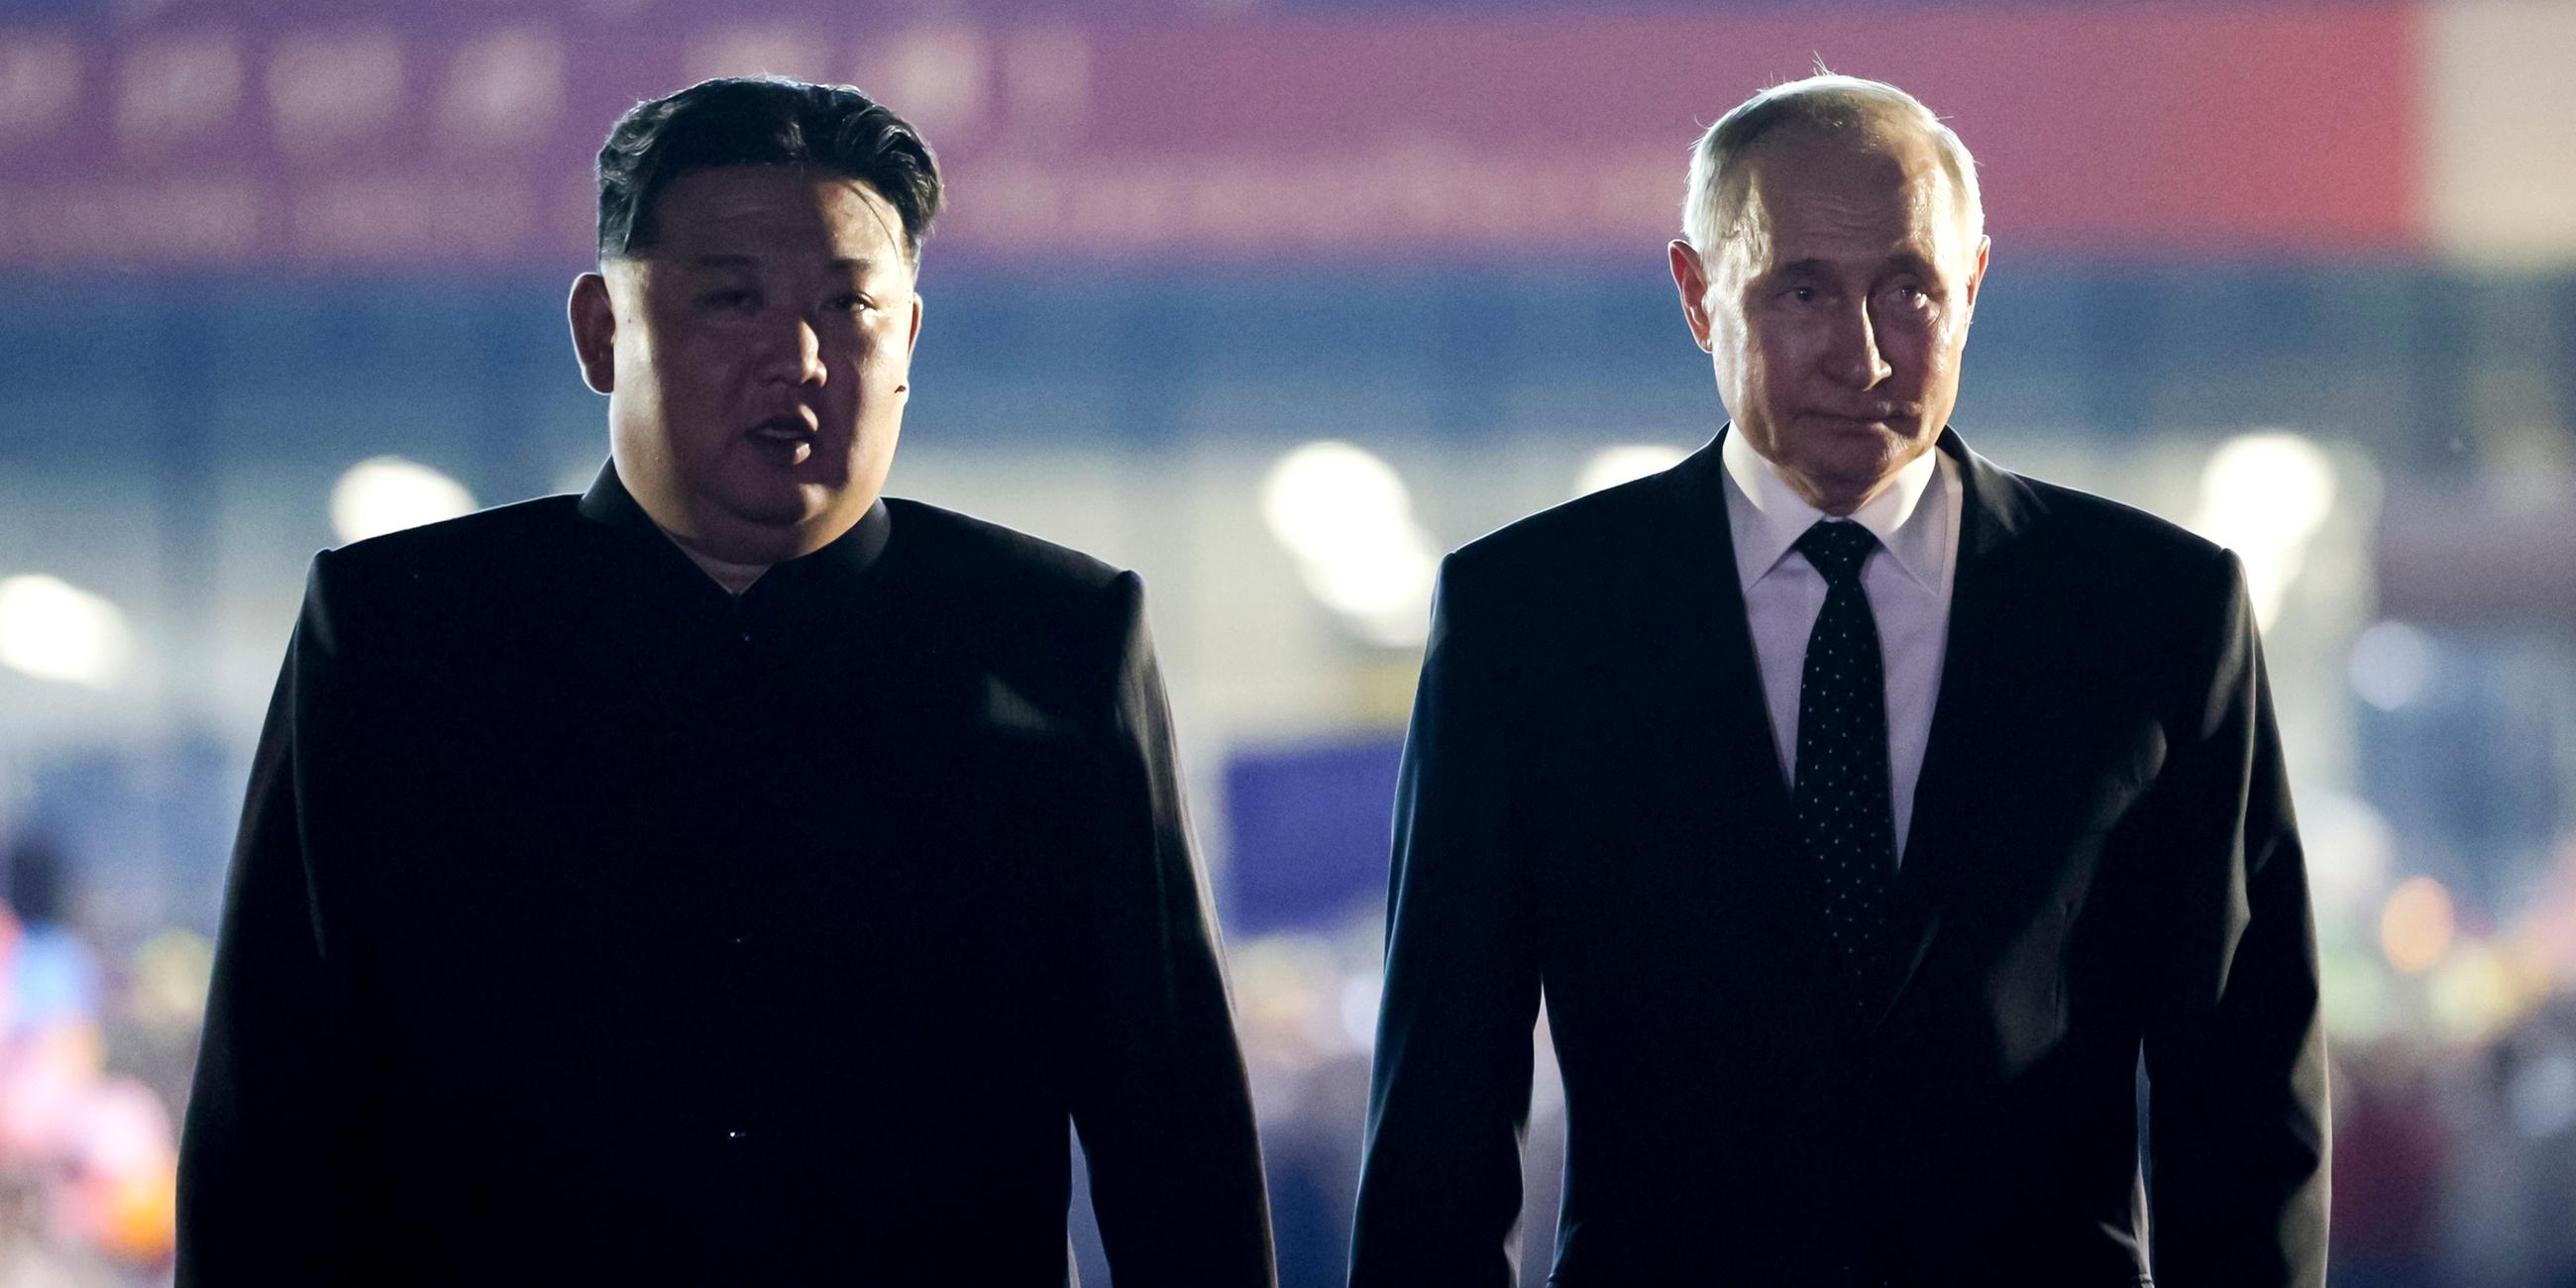 Russian President Vladimir Putin, right, and North Korea's leader Kim Jong Un stand together during the departure ceremony at an international airport outside Pyongyang, North Korea, on Wednesday, June 19, 2024.